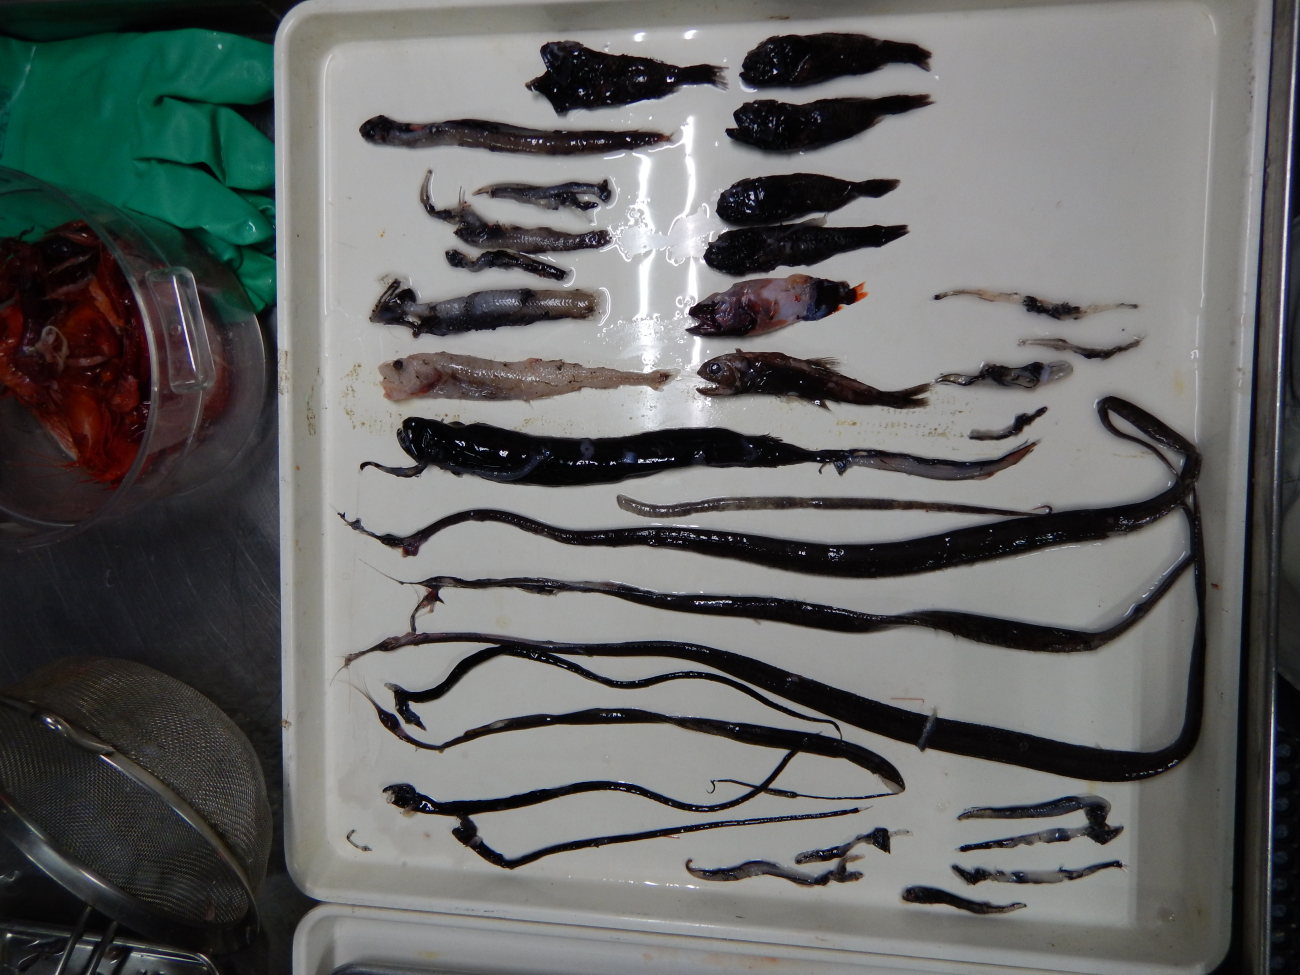 Midwater fish including a fair-sized snipe eel seen on a sorting tray